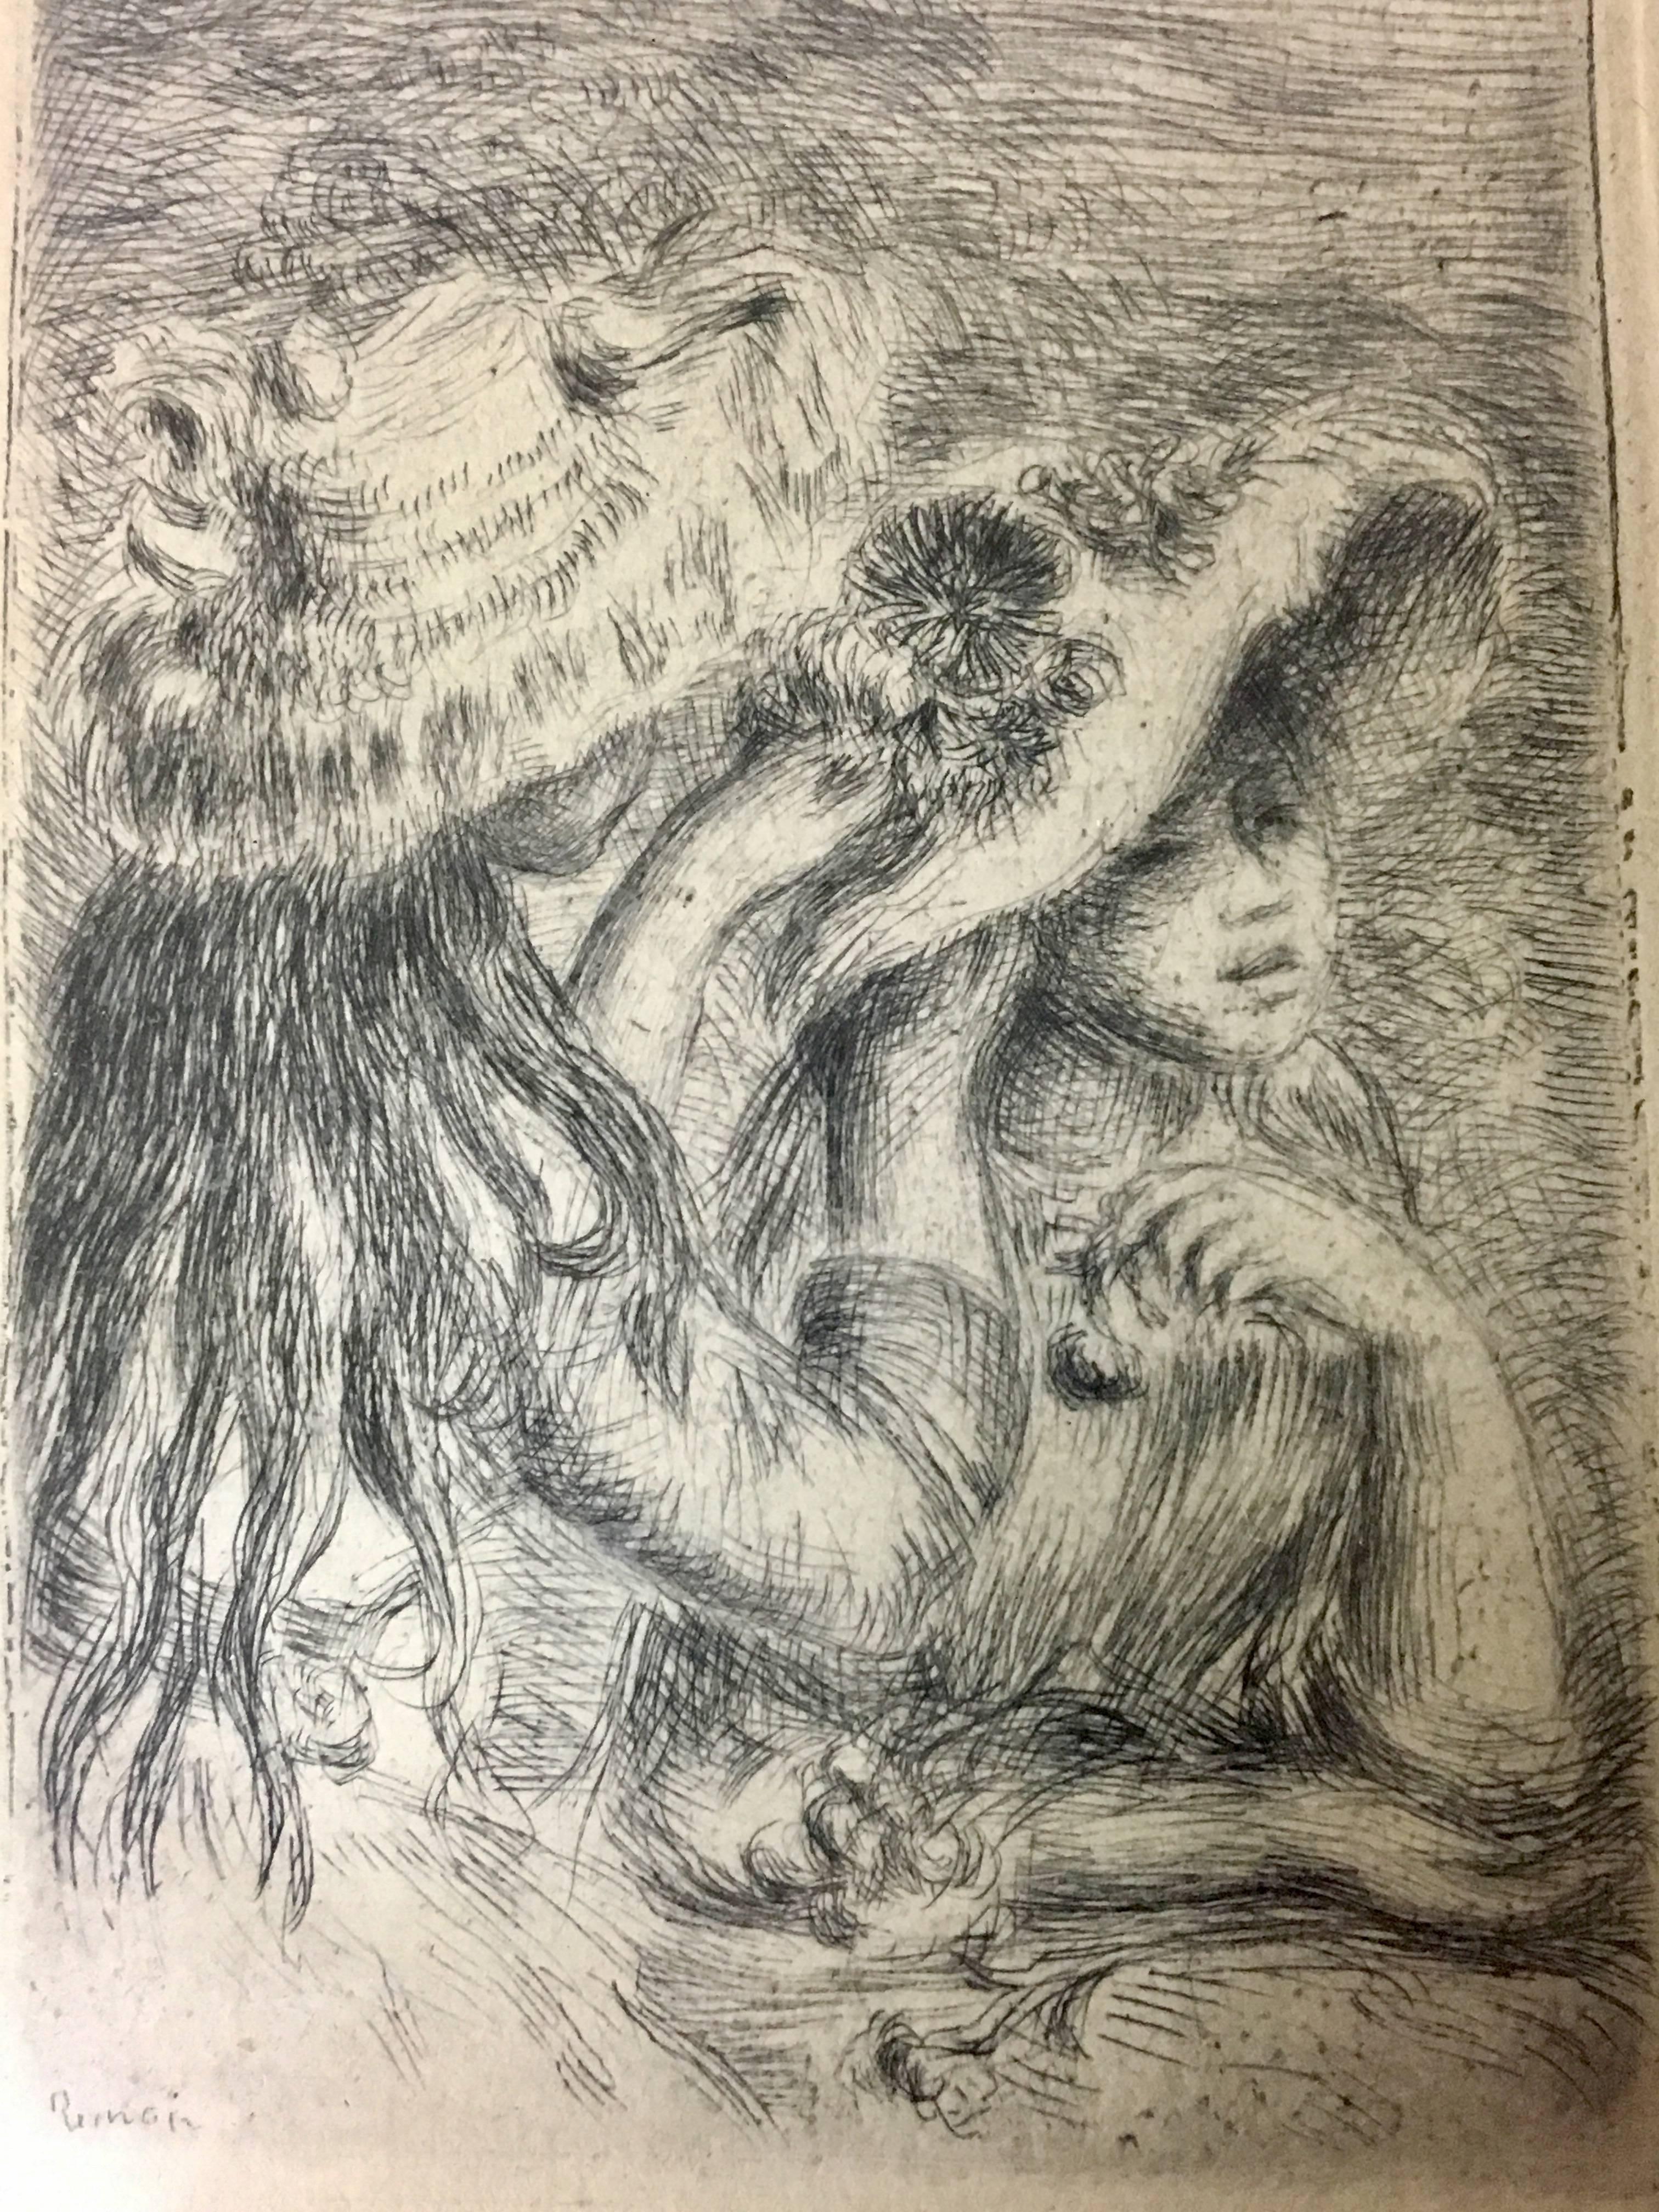 Original dry point etching printed in black ink on laid paper by Pierre-Auguste Renoir entitled "Le Chapeau Epingle", circa 1894. The piece is signed in plate. Measurements are as follows:

Framed: 11.75" x 10.38"

Sheet